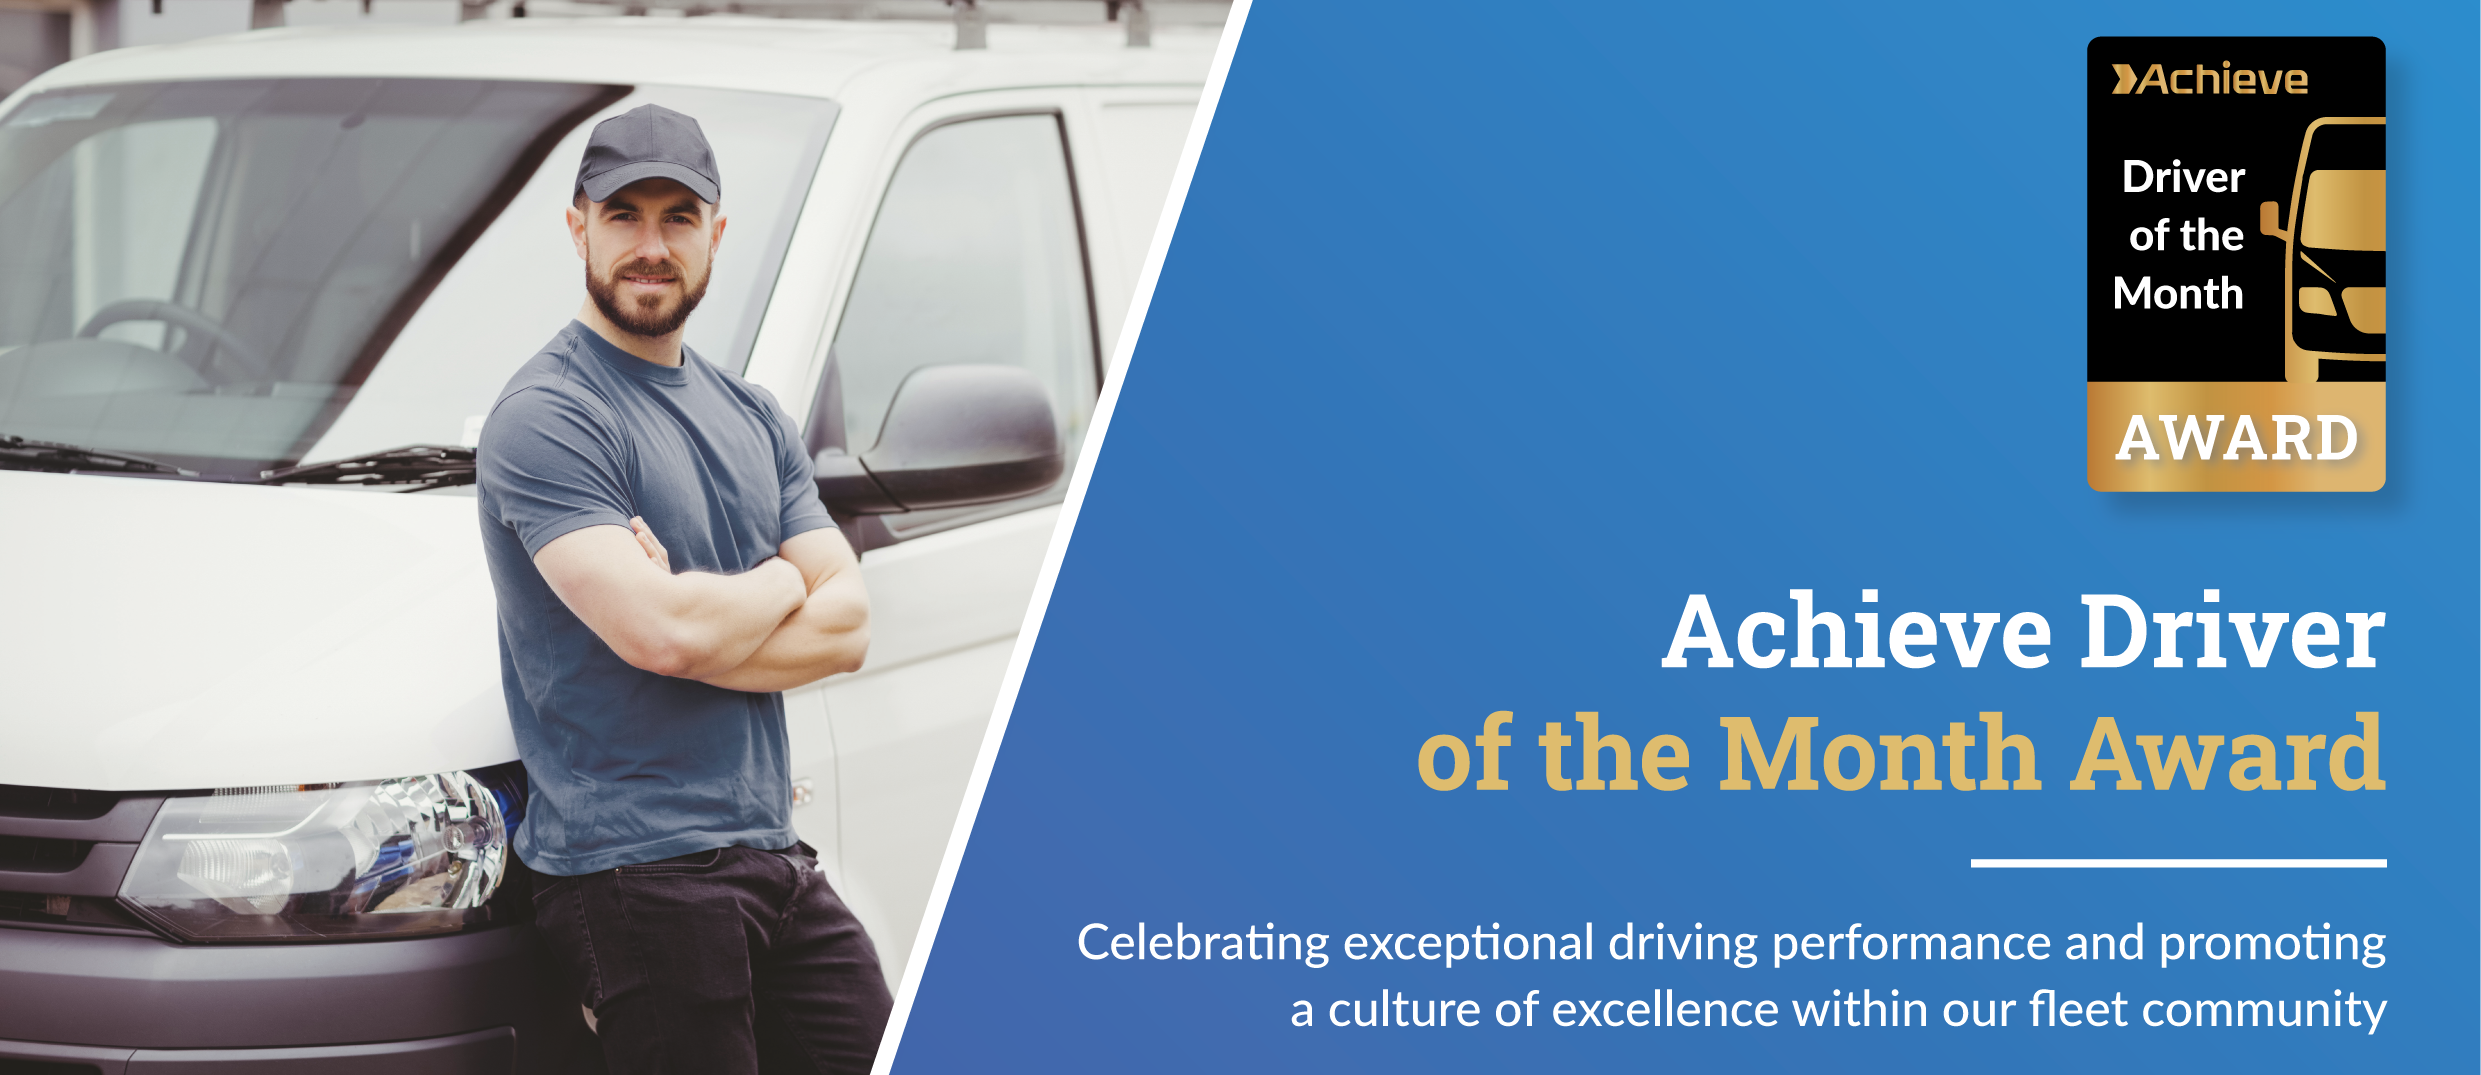 ACHIEVE DRIVER OF THE MONTH AWARD